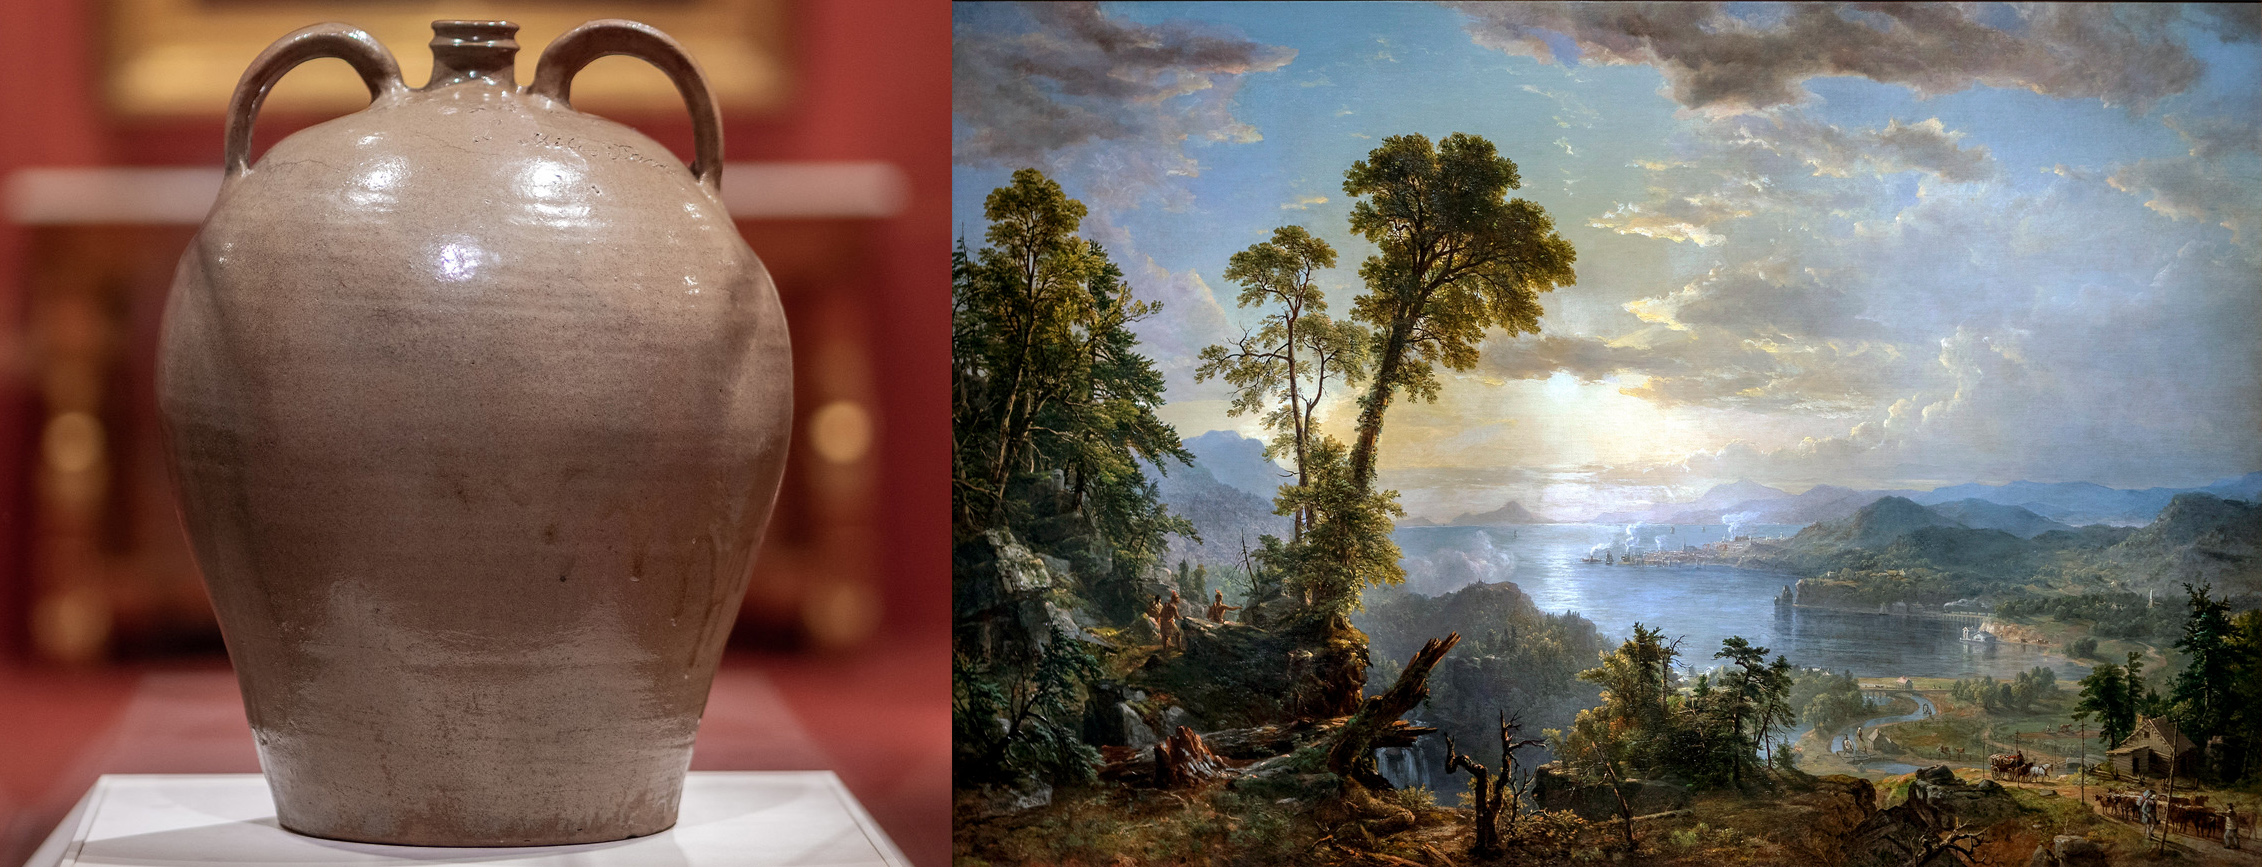 left: David Drake, Doubled-handled Jug (Lewis J. Miles Factory, Horse Creek Valley, Edgefield District, South Carolina), 1840, stoneware with alkaline glaze, 44.13 x 35.24 cm (Virginia Museum of Fine Arts; photo: Steven Zucker, CC BY-NC-SA 2.0) right: Asher B. Durand, Progress (The Advance of Civilization), 1853, oil on canvas, 148.43 x 208.92 (Virginia Museum of Fine Arts, photo: Steven Zucker, CC BY-NC-SA 2.0)